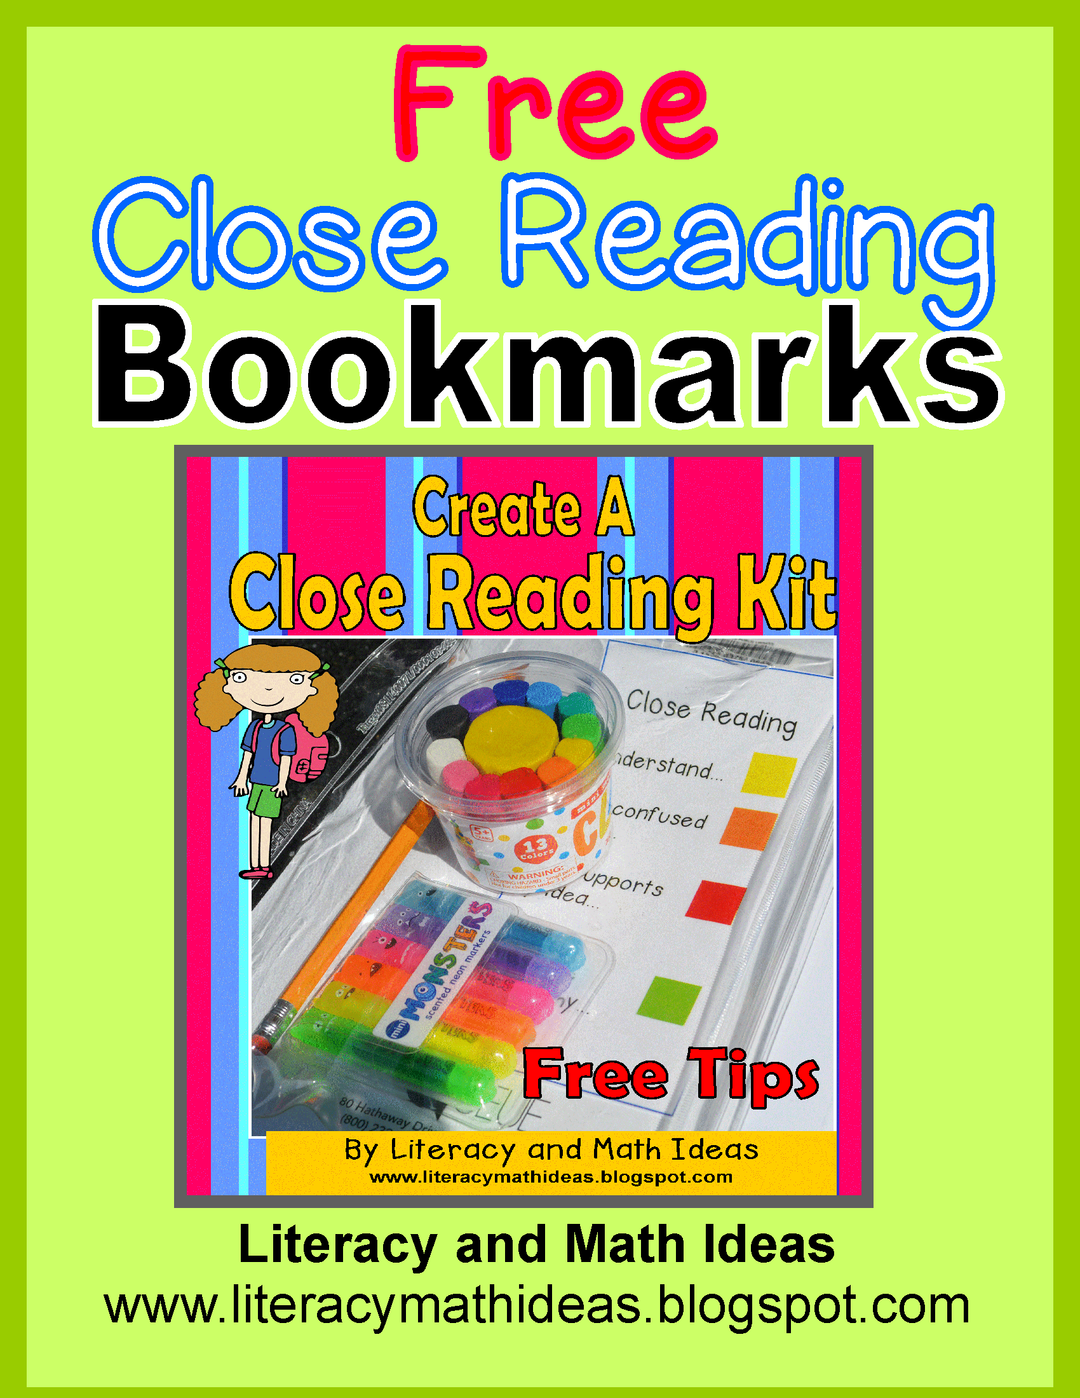 Free Close Reading Bookmarks